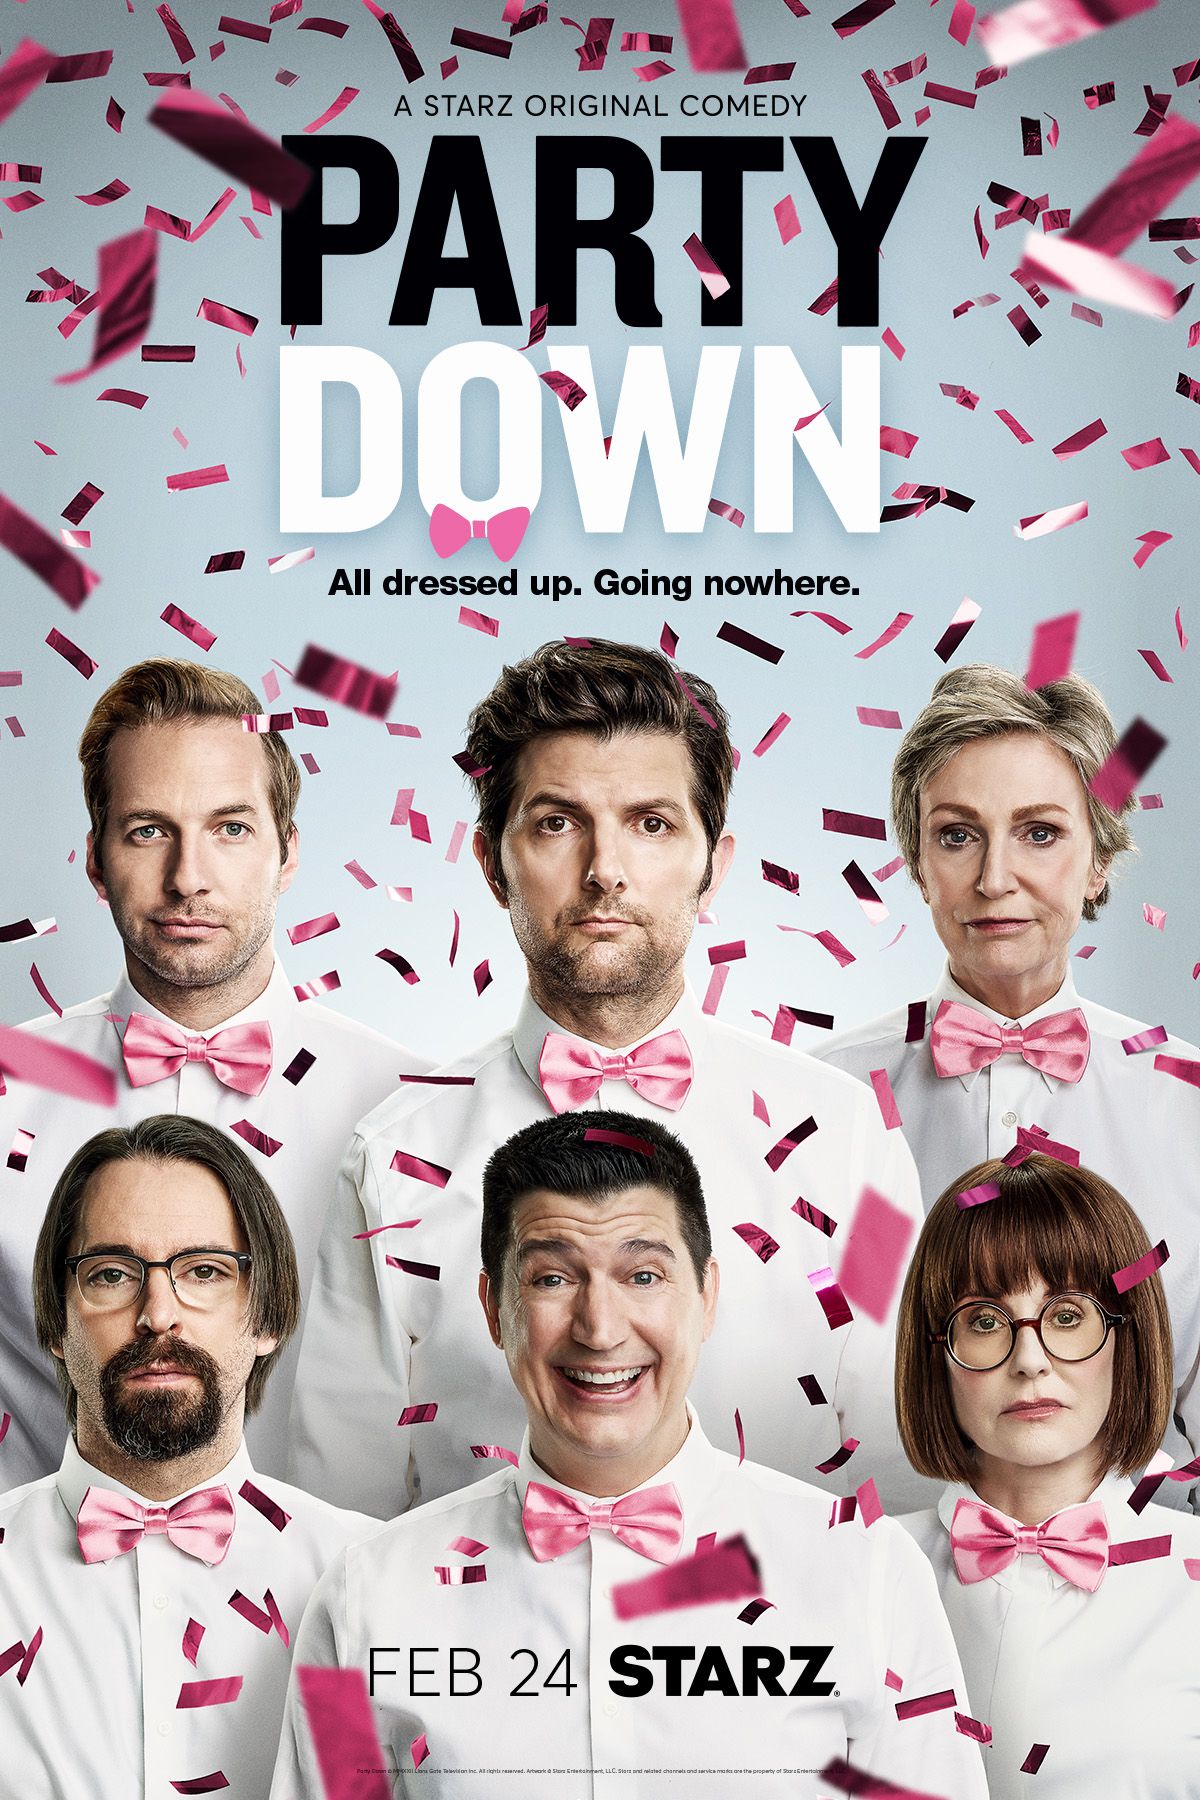 How to Watch the Party Down Revival on Starz